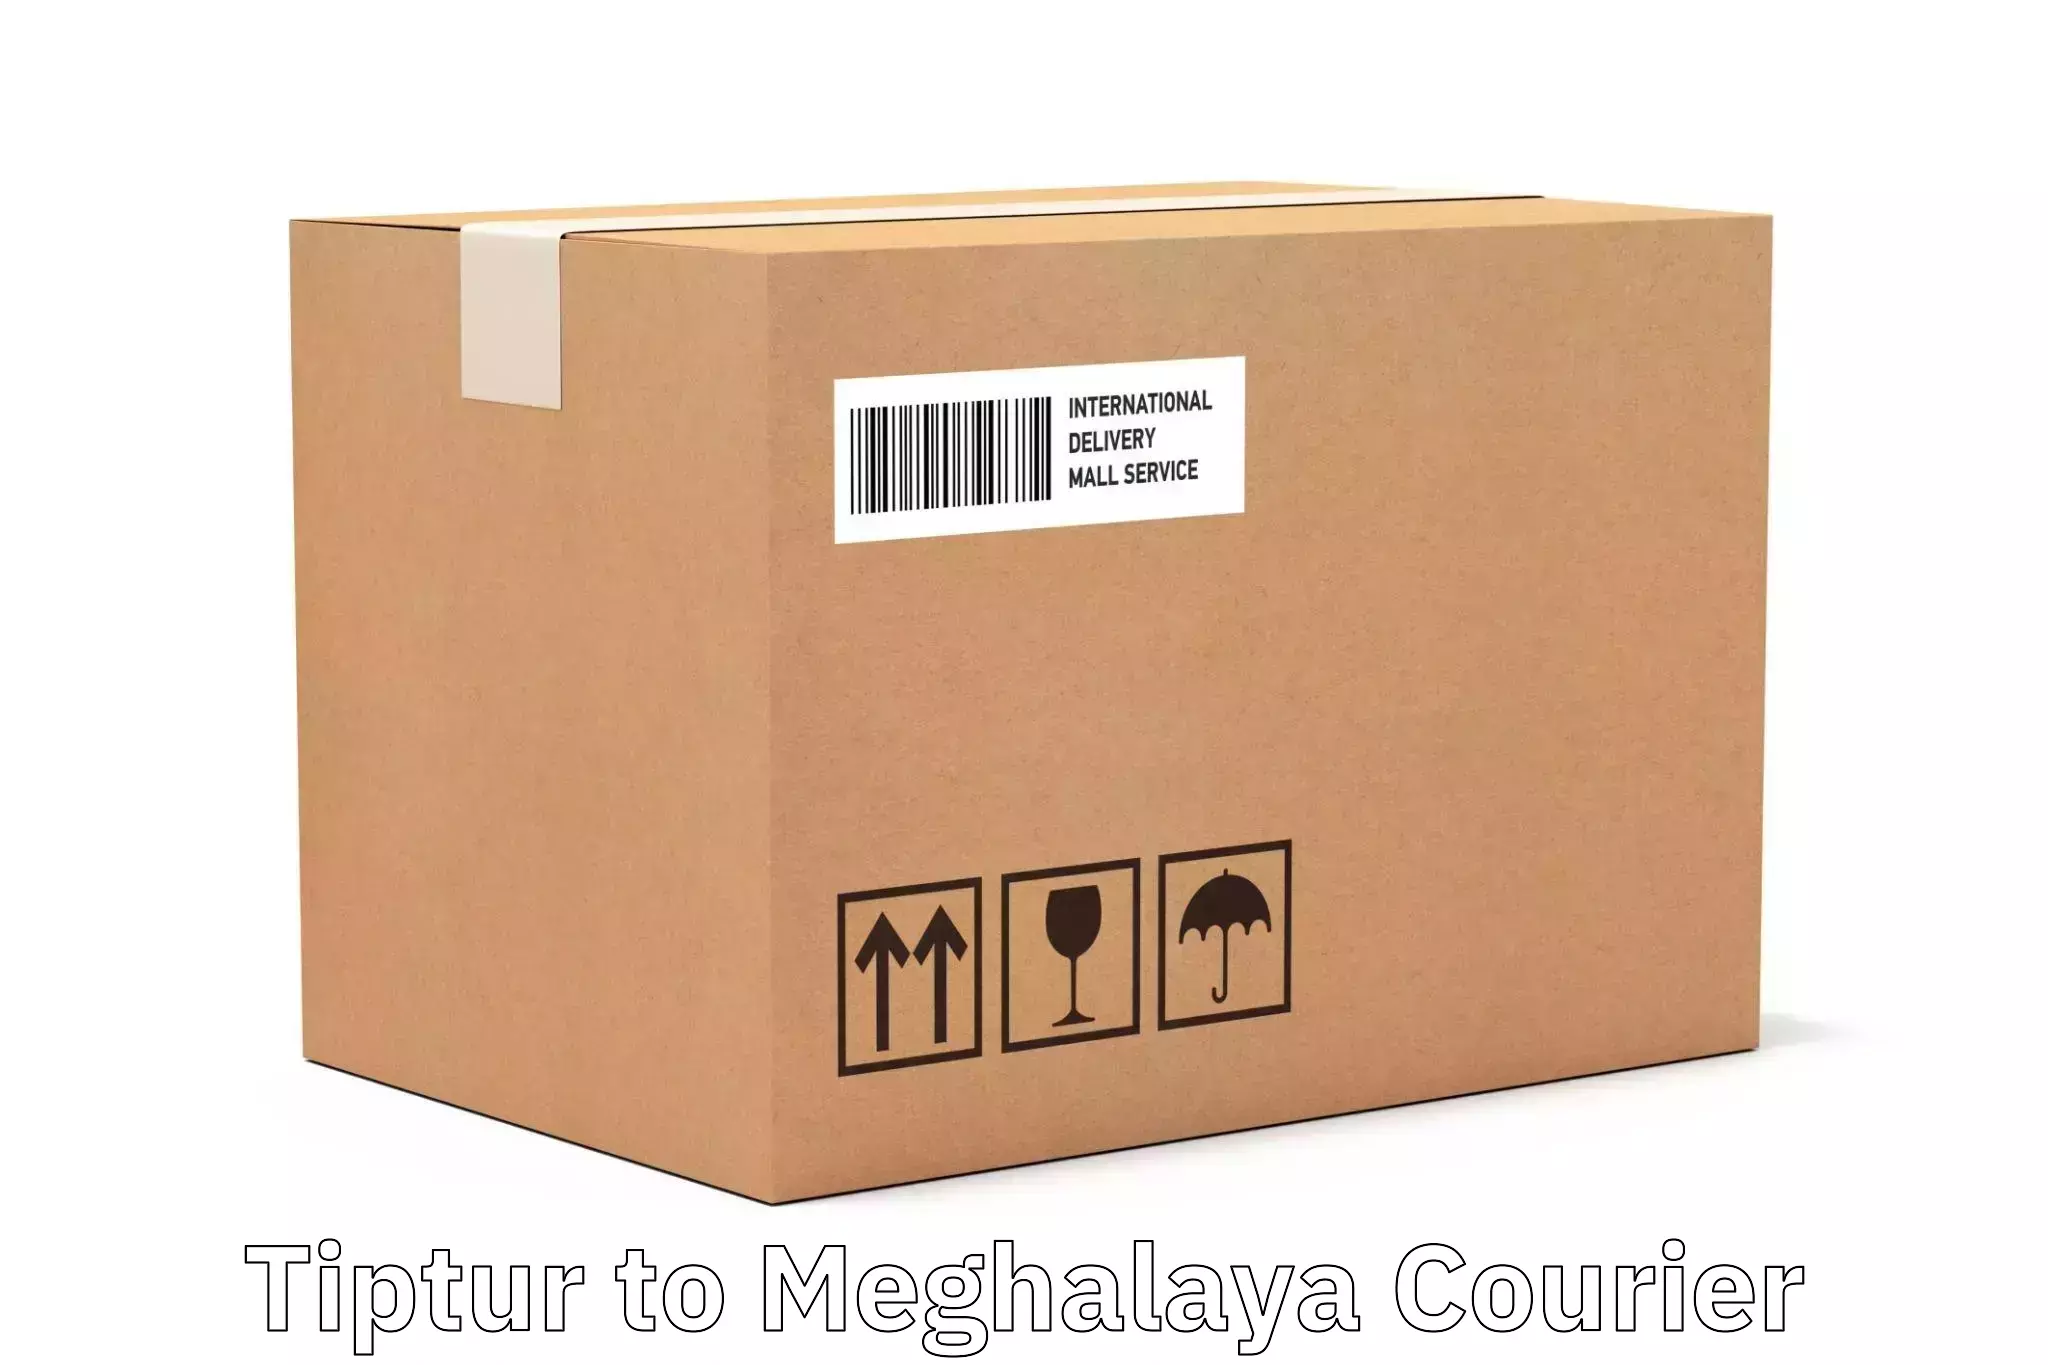 User-friendly courier app Tiptur to Meghalaya